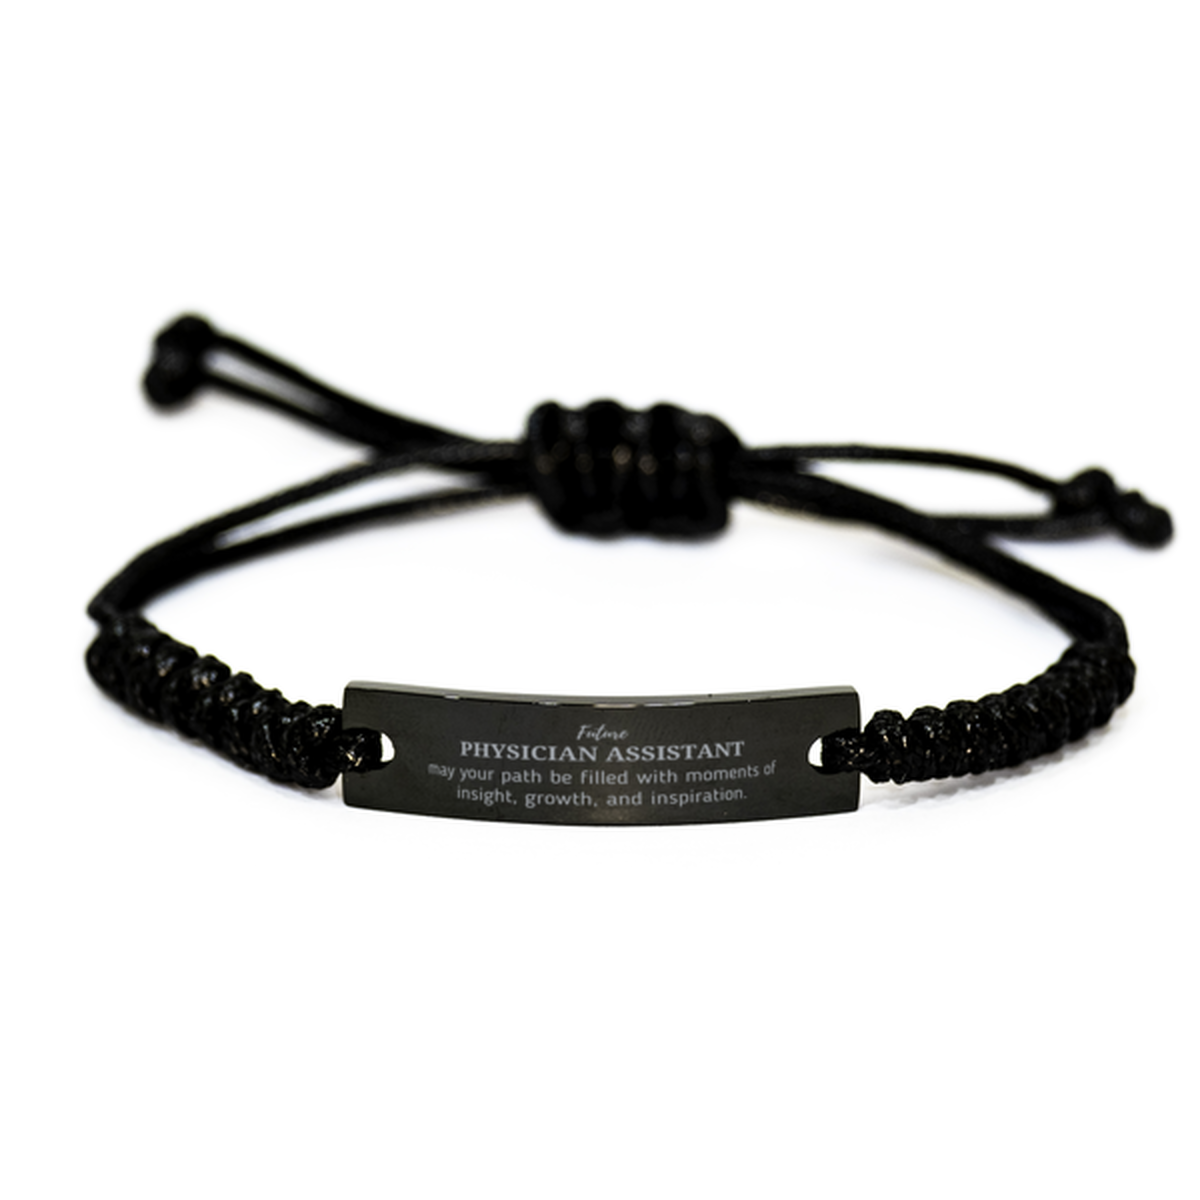 Future Physician Assistant Gifts, May your path be filled with moments of insight, Graduation Gifts for New Physician Assistant, Christmas Unique Black Rope Bracelet For Men, Women, Friends